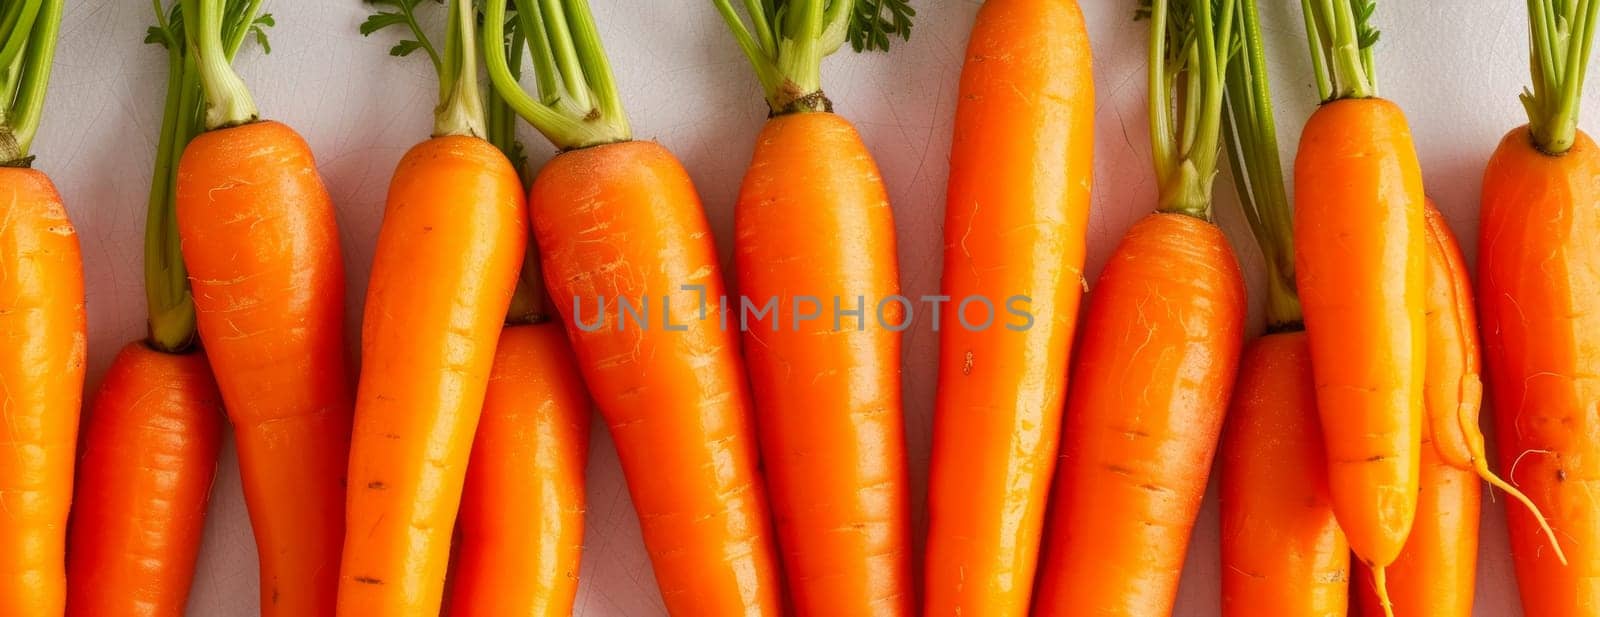 Top view of bunch of fresh organic carrots on white background representing concept of healthy food.